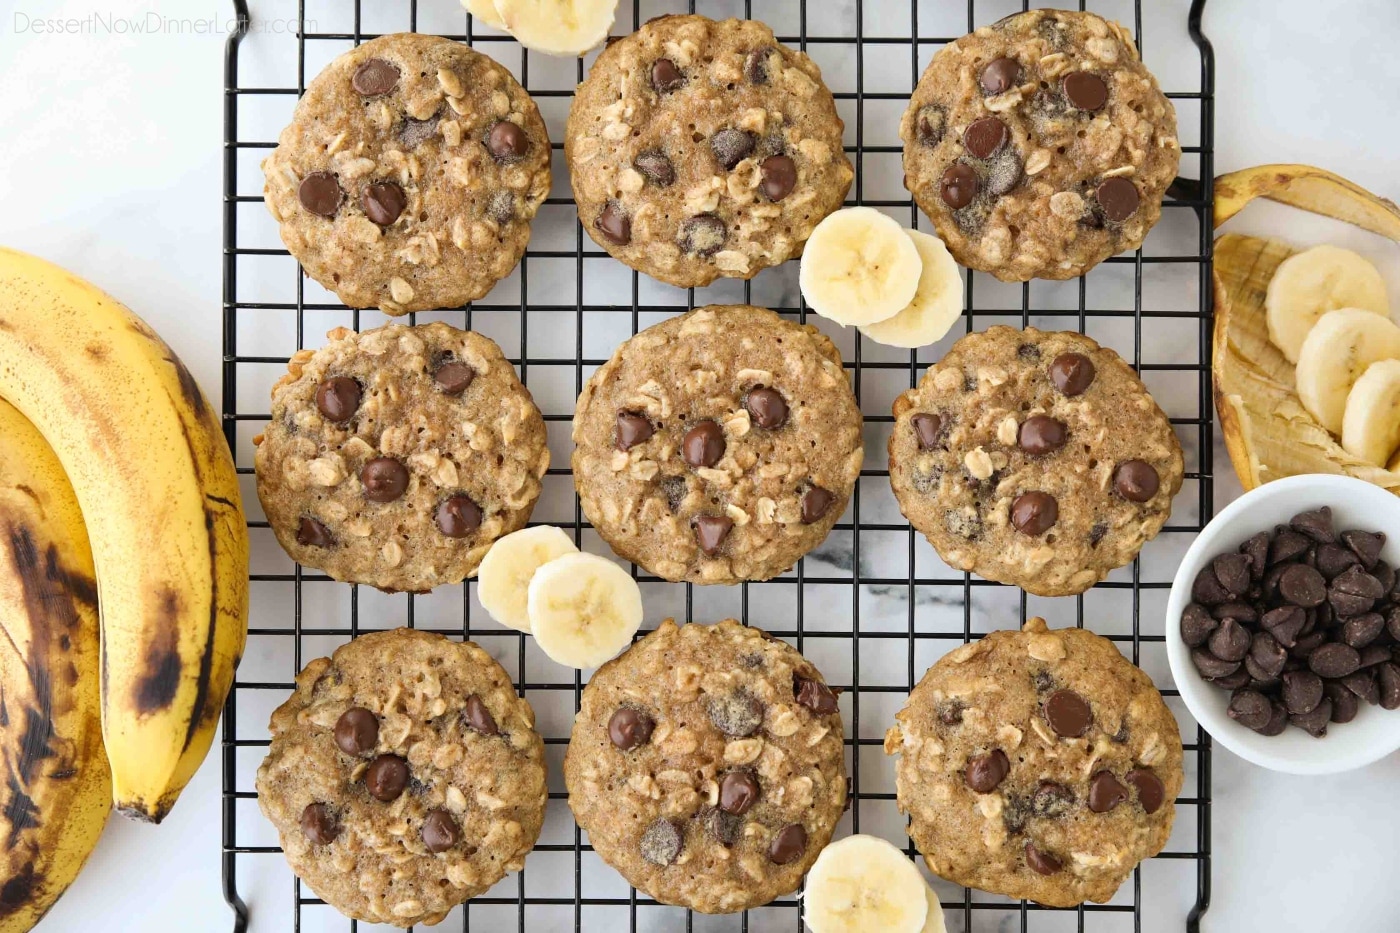 Banana Chocolate Chip Oatmeal Cookies - Your Cup of Cake